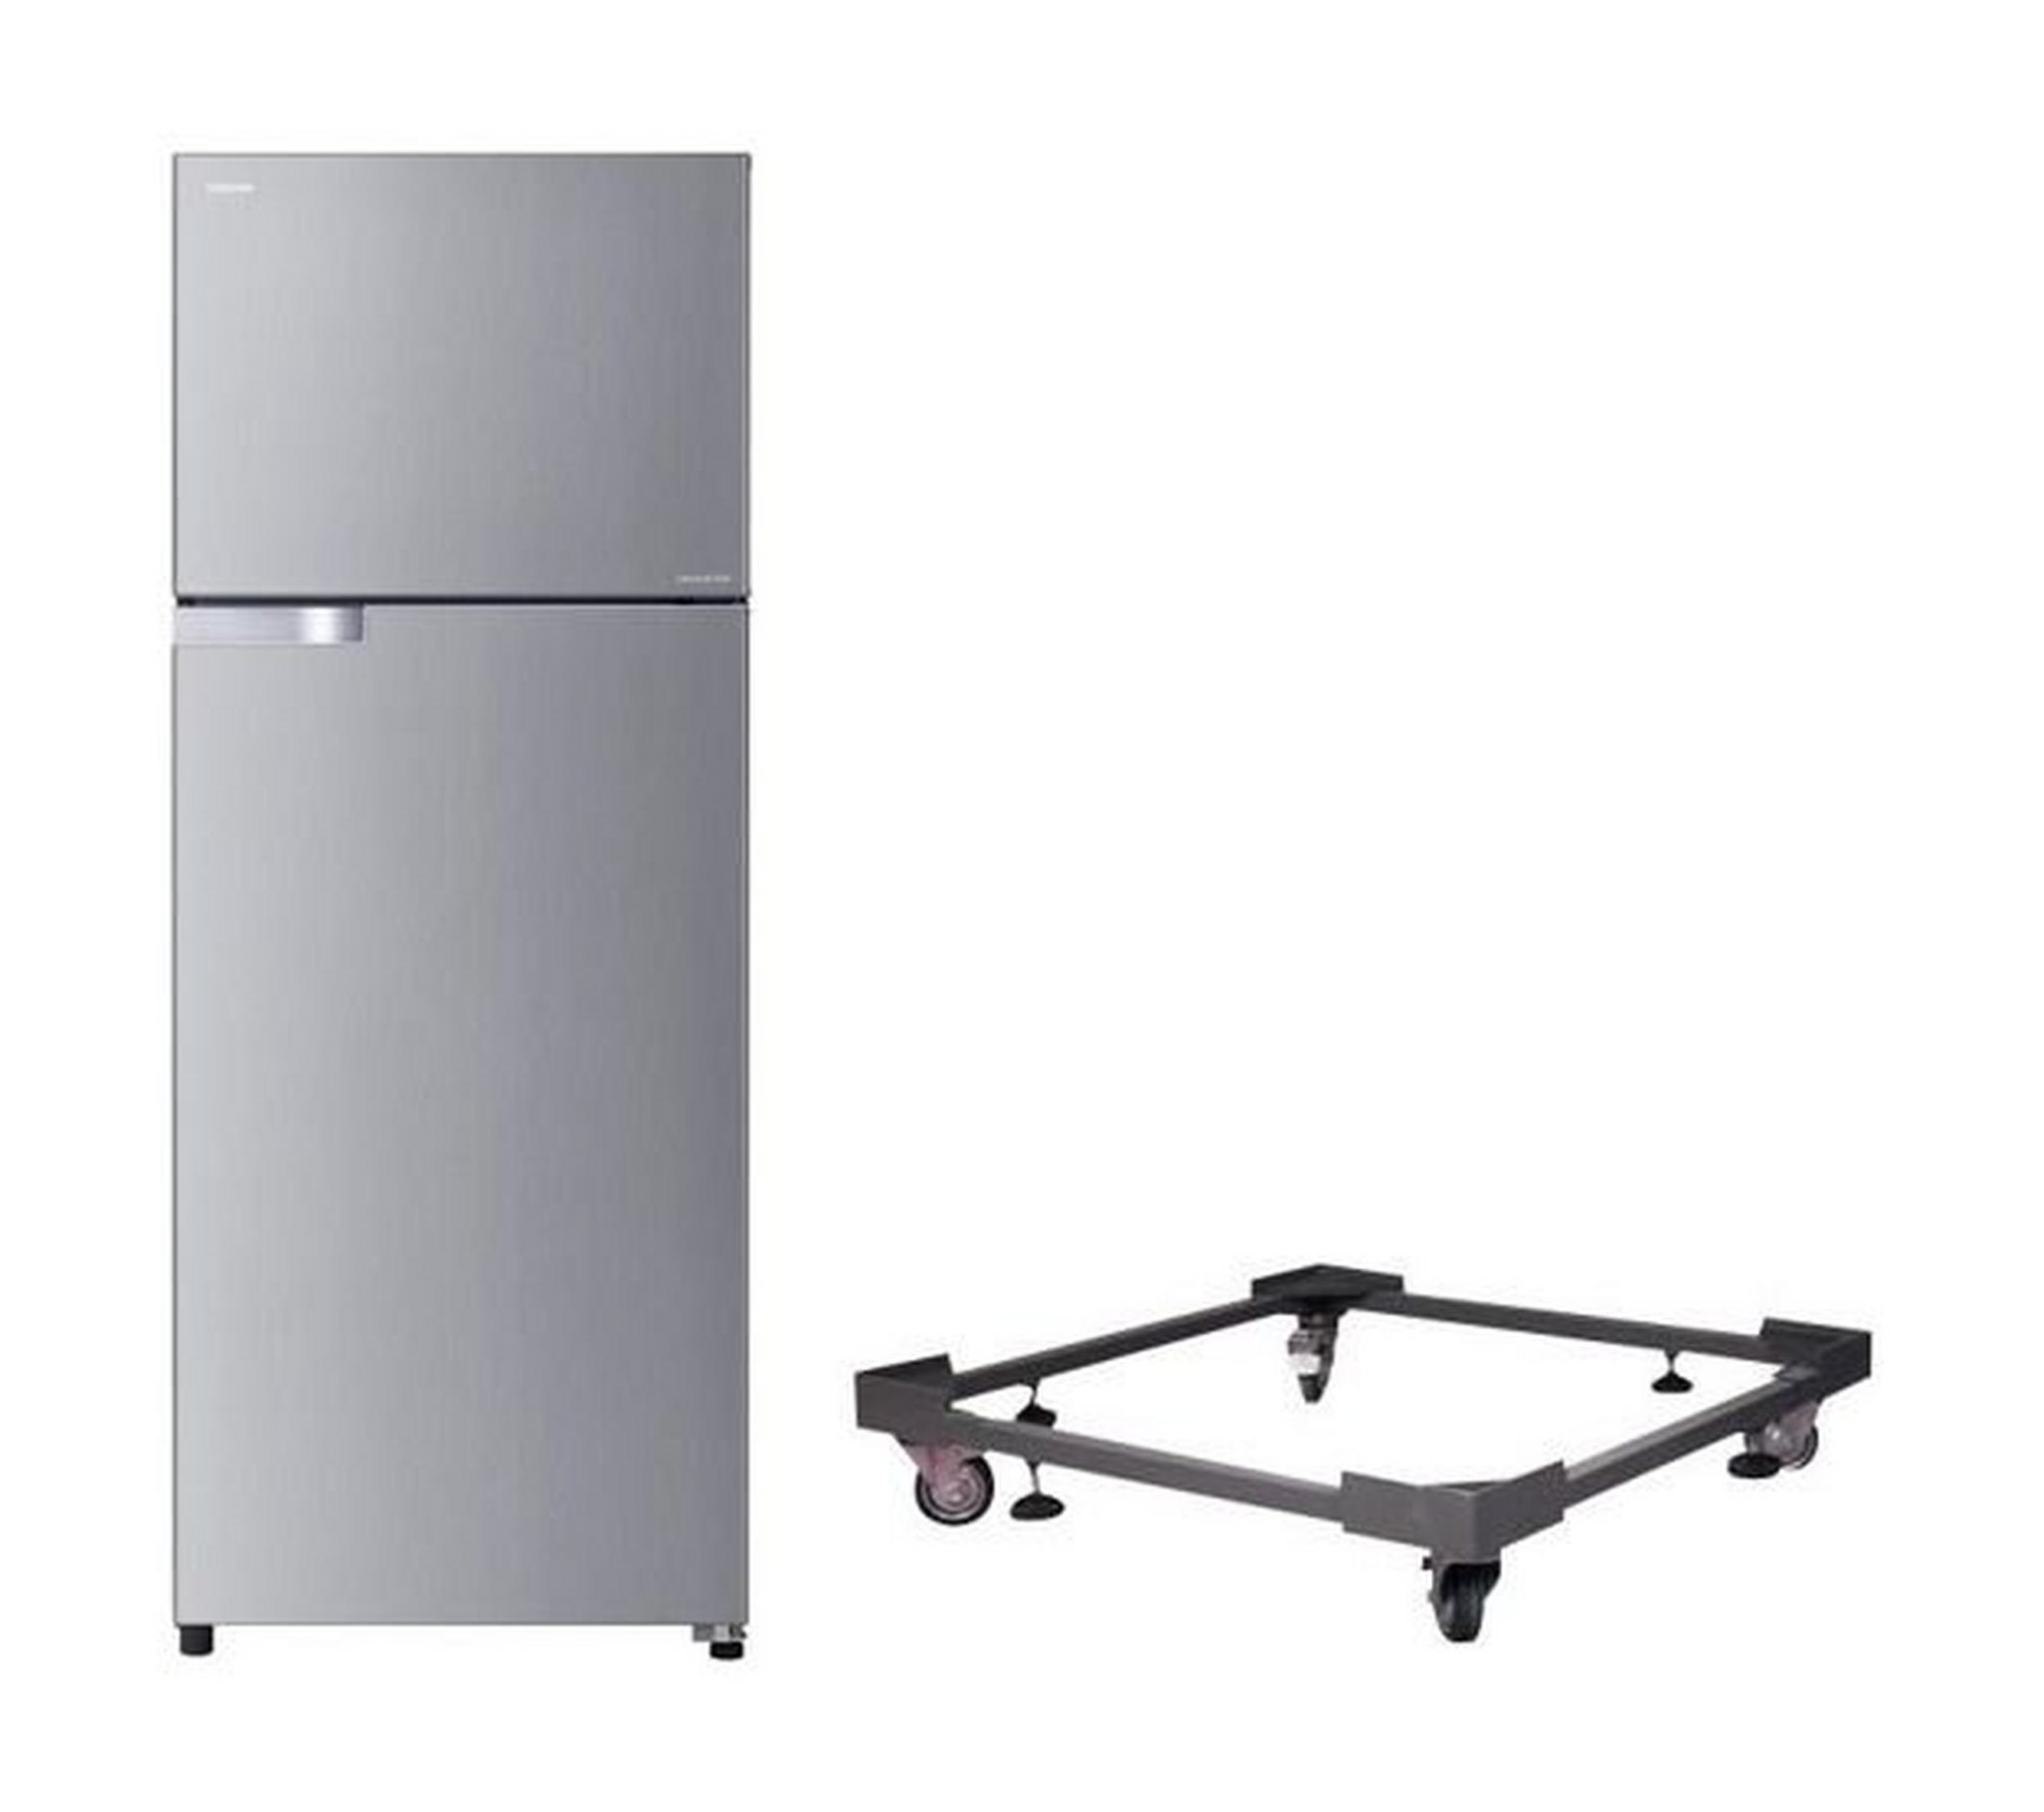 Toshiba Inverter 18 Cft. Double Door Refrigerator + Stand For Refrigerator With Large Wheels